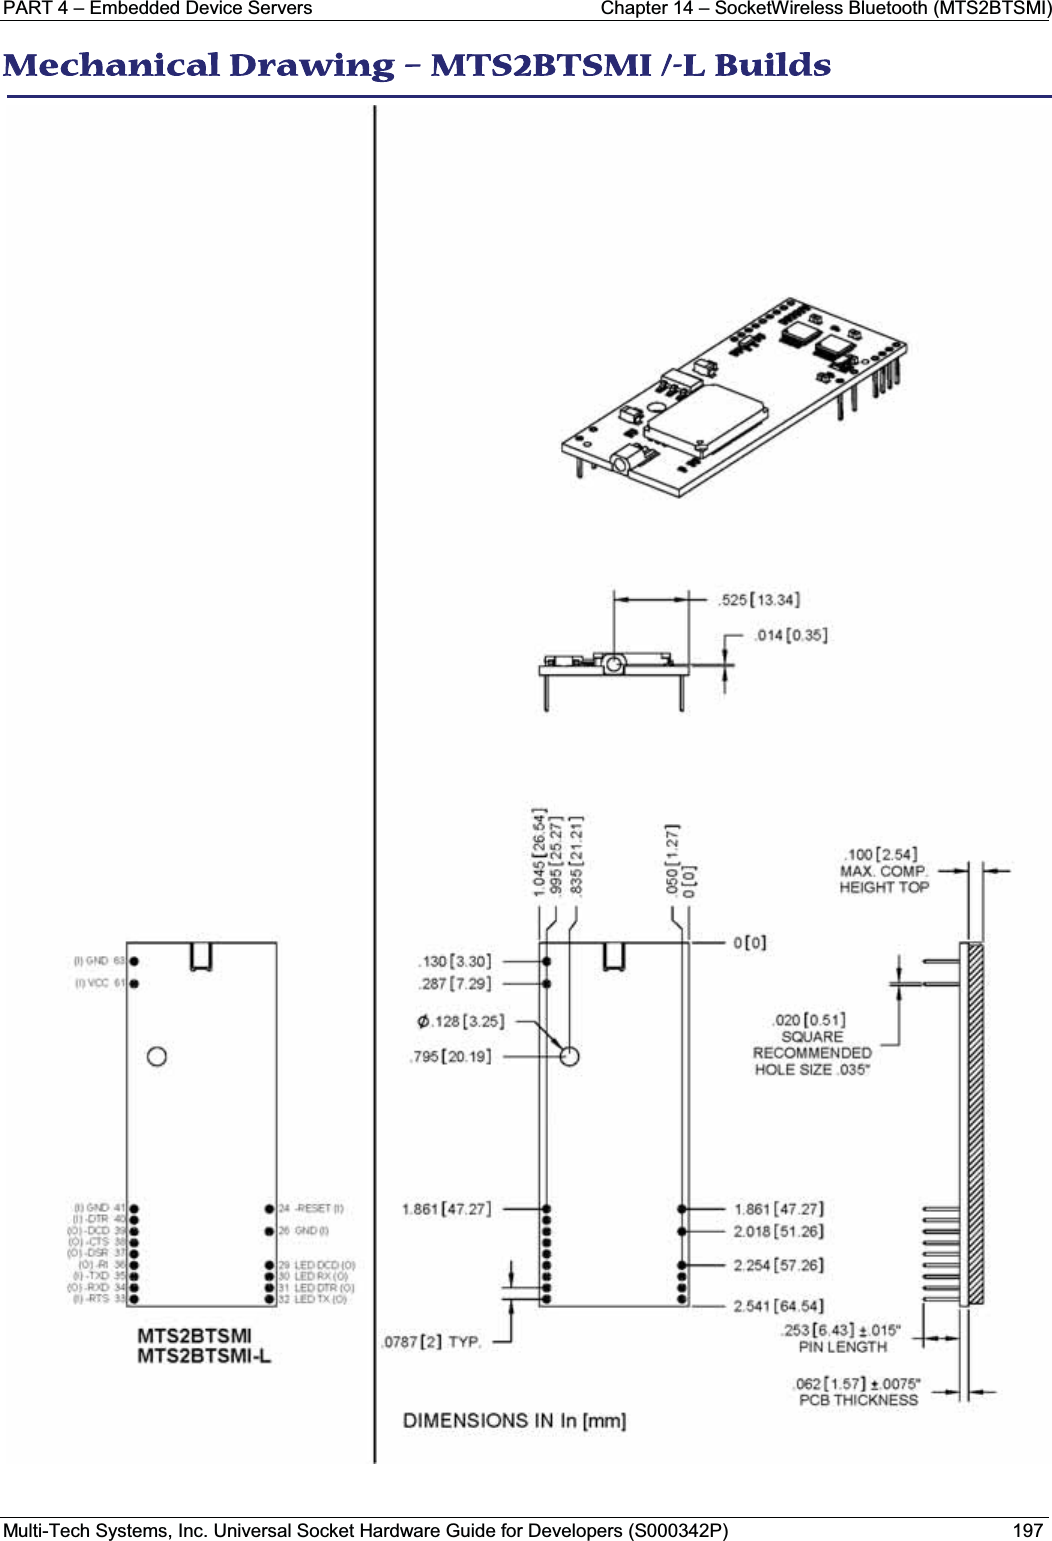 PART 4 – Embedded Device Servers Chapter 14 – SocketWireless Bluetooth (MTS2BTSMI)Multi-Tech Systems, Inc. Universal Socket Hardware Guide for Developers (S000342P) 197MMechanical Drawing – MTS2BTSMI /-L Builds 